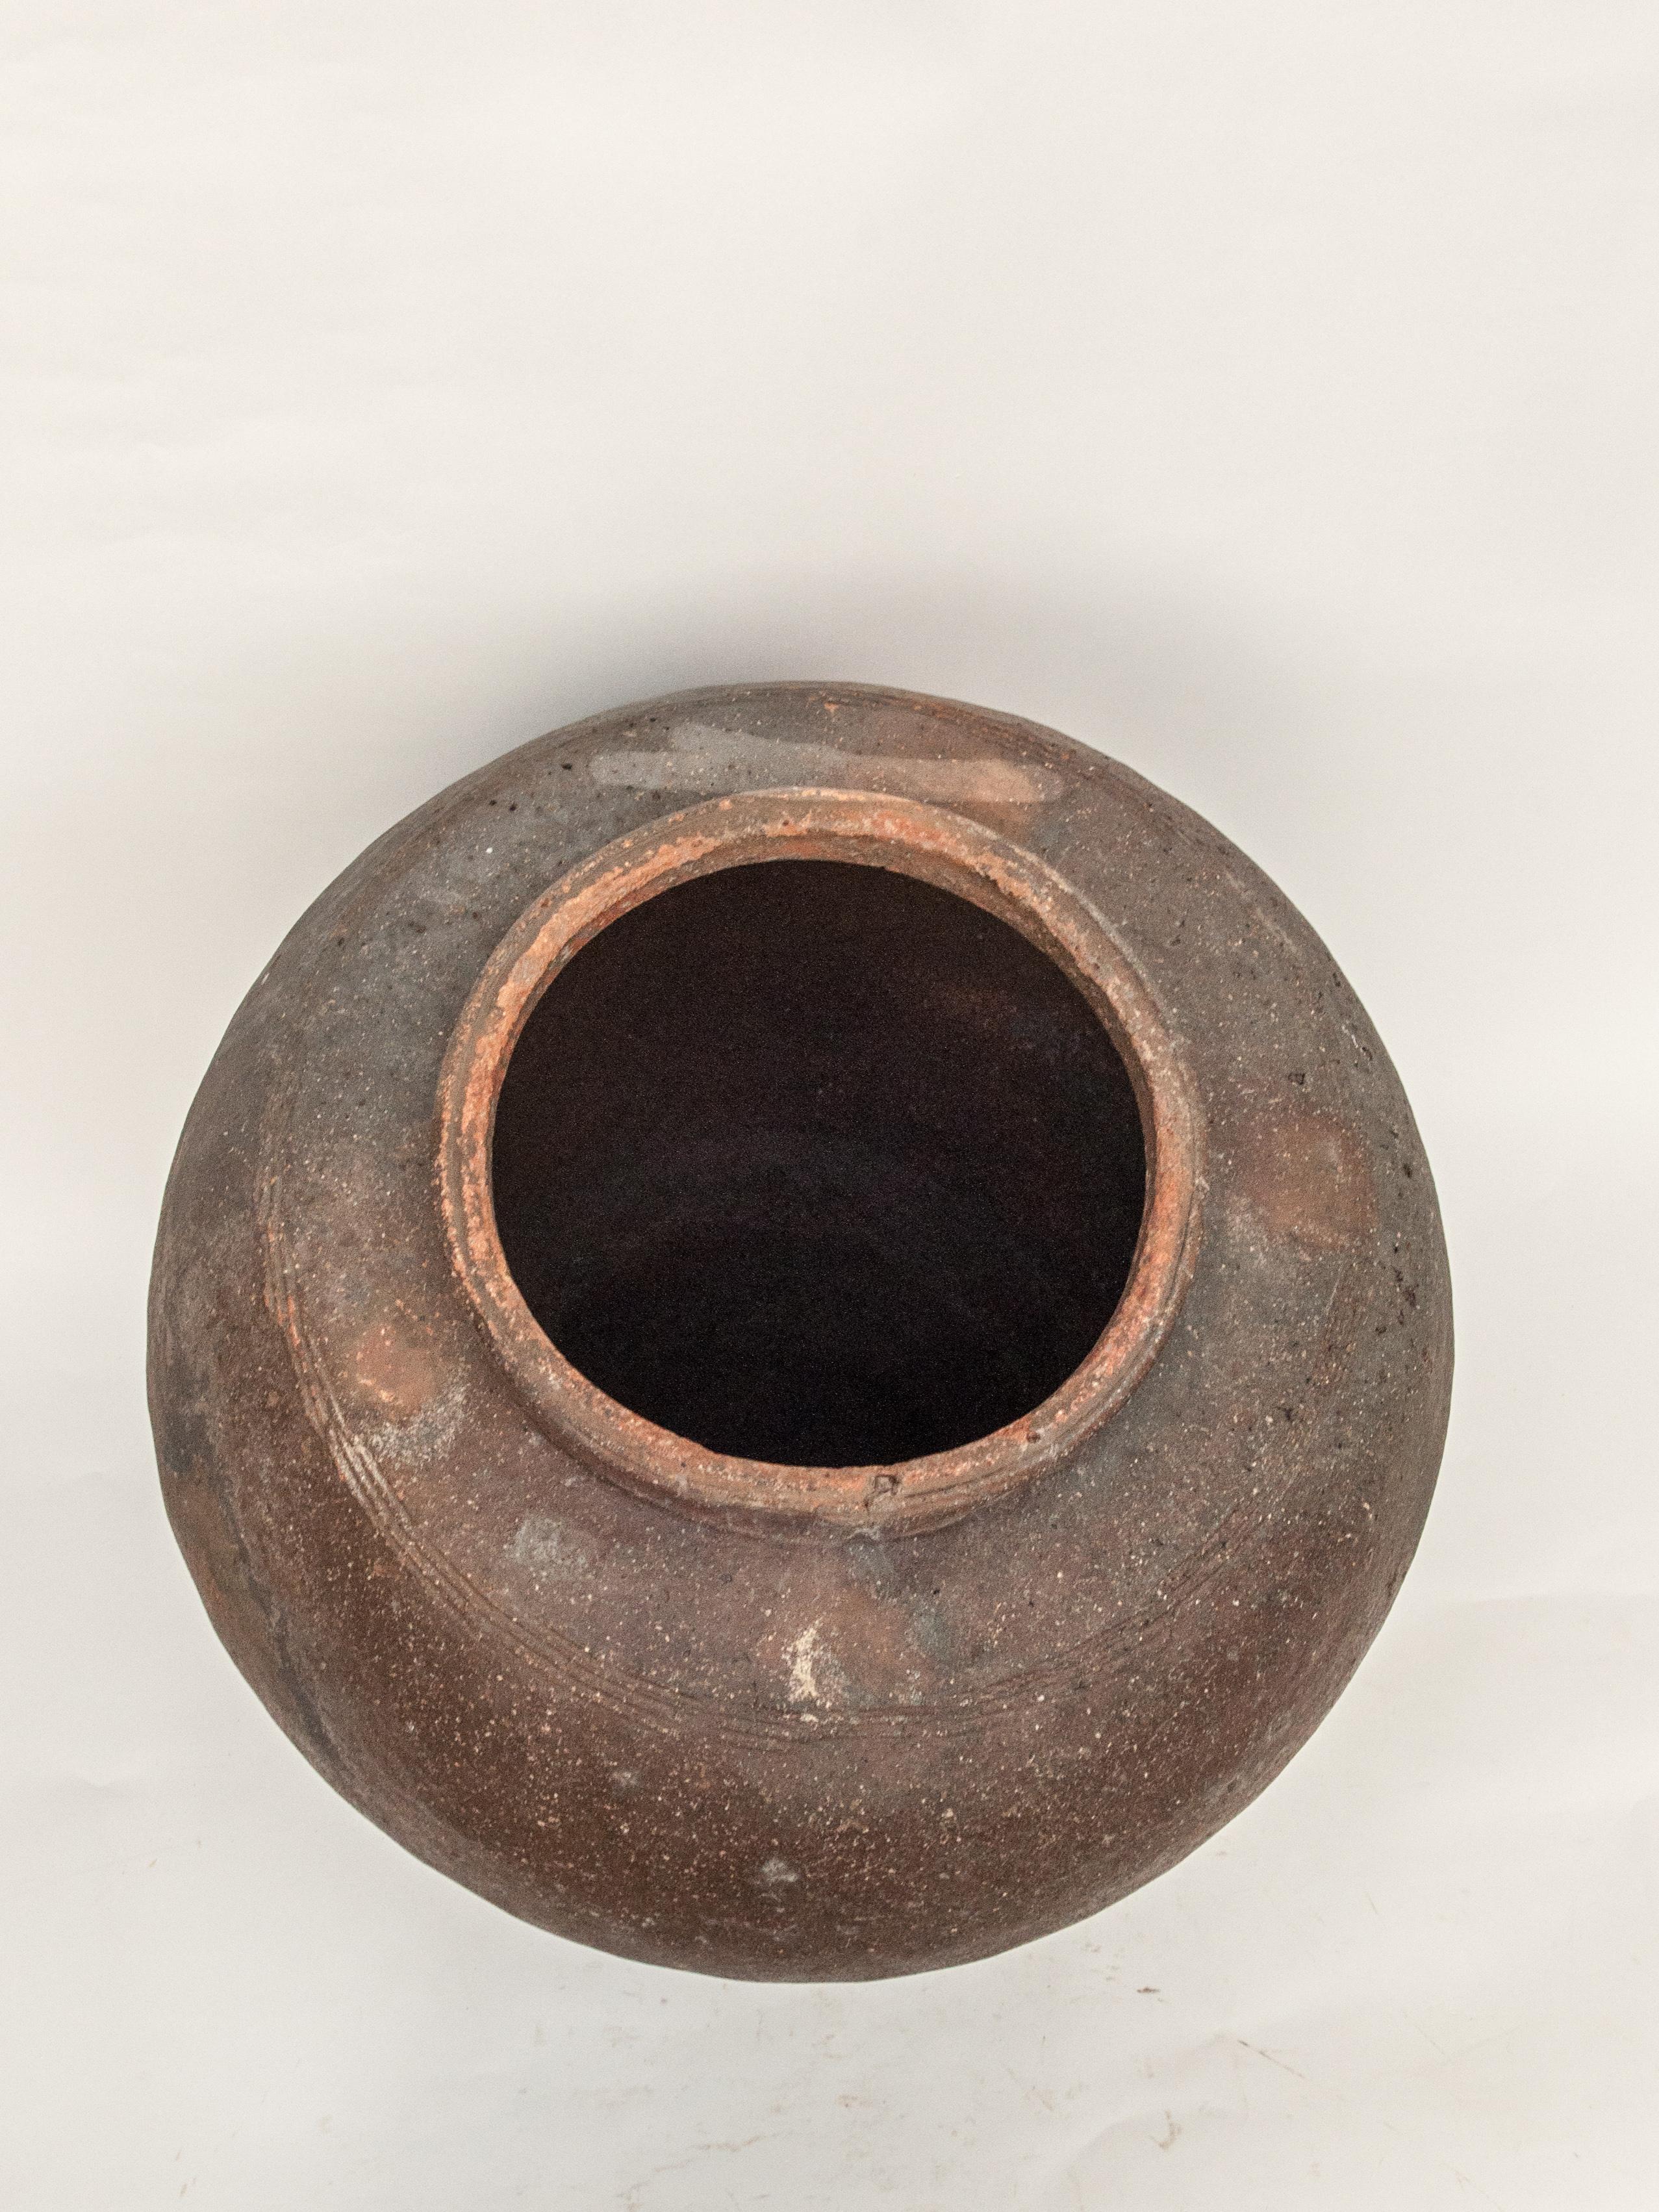 Indonesian Large Vintage Storage or Water Jar from Borneo, Unglazed, Mid-20th Century